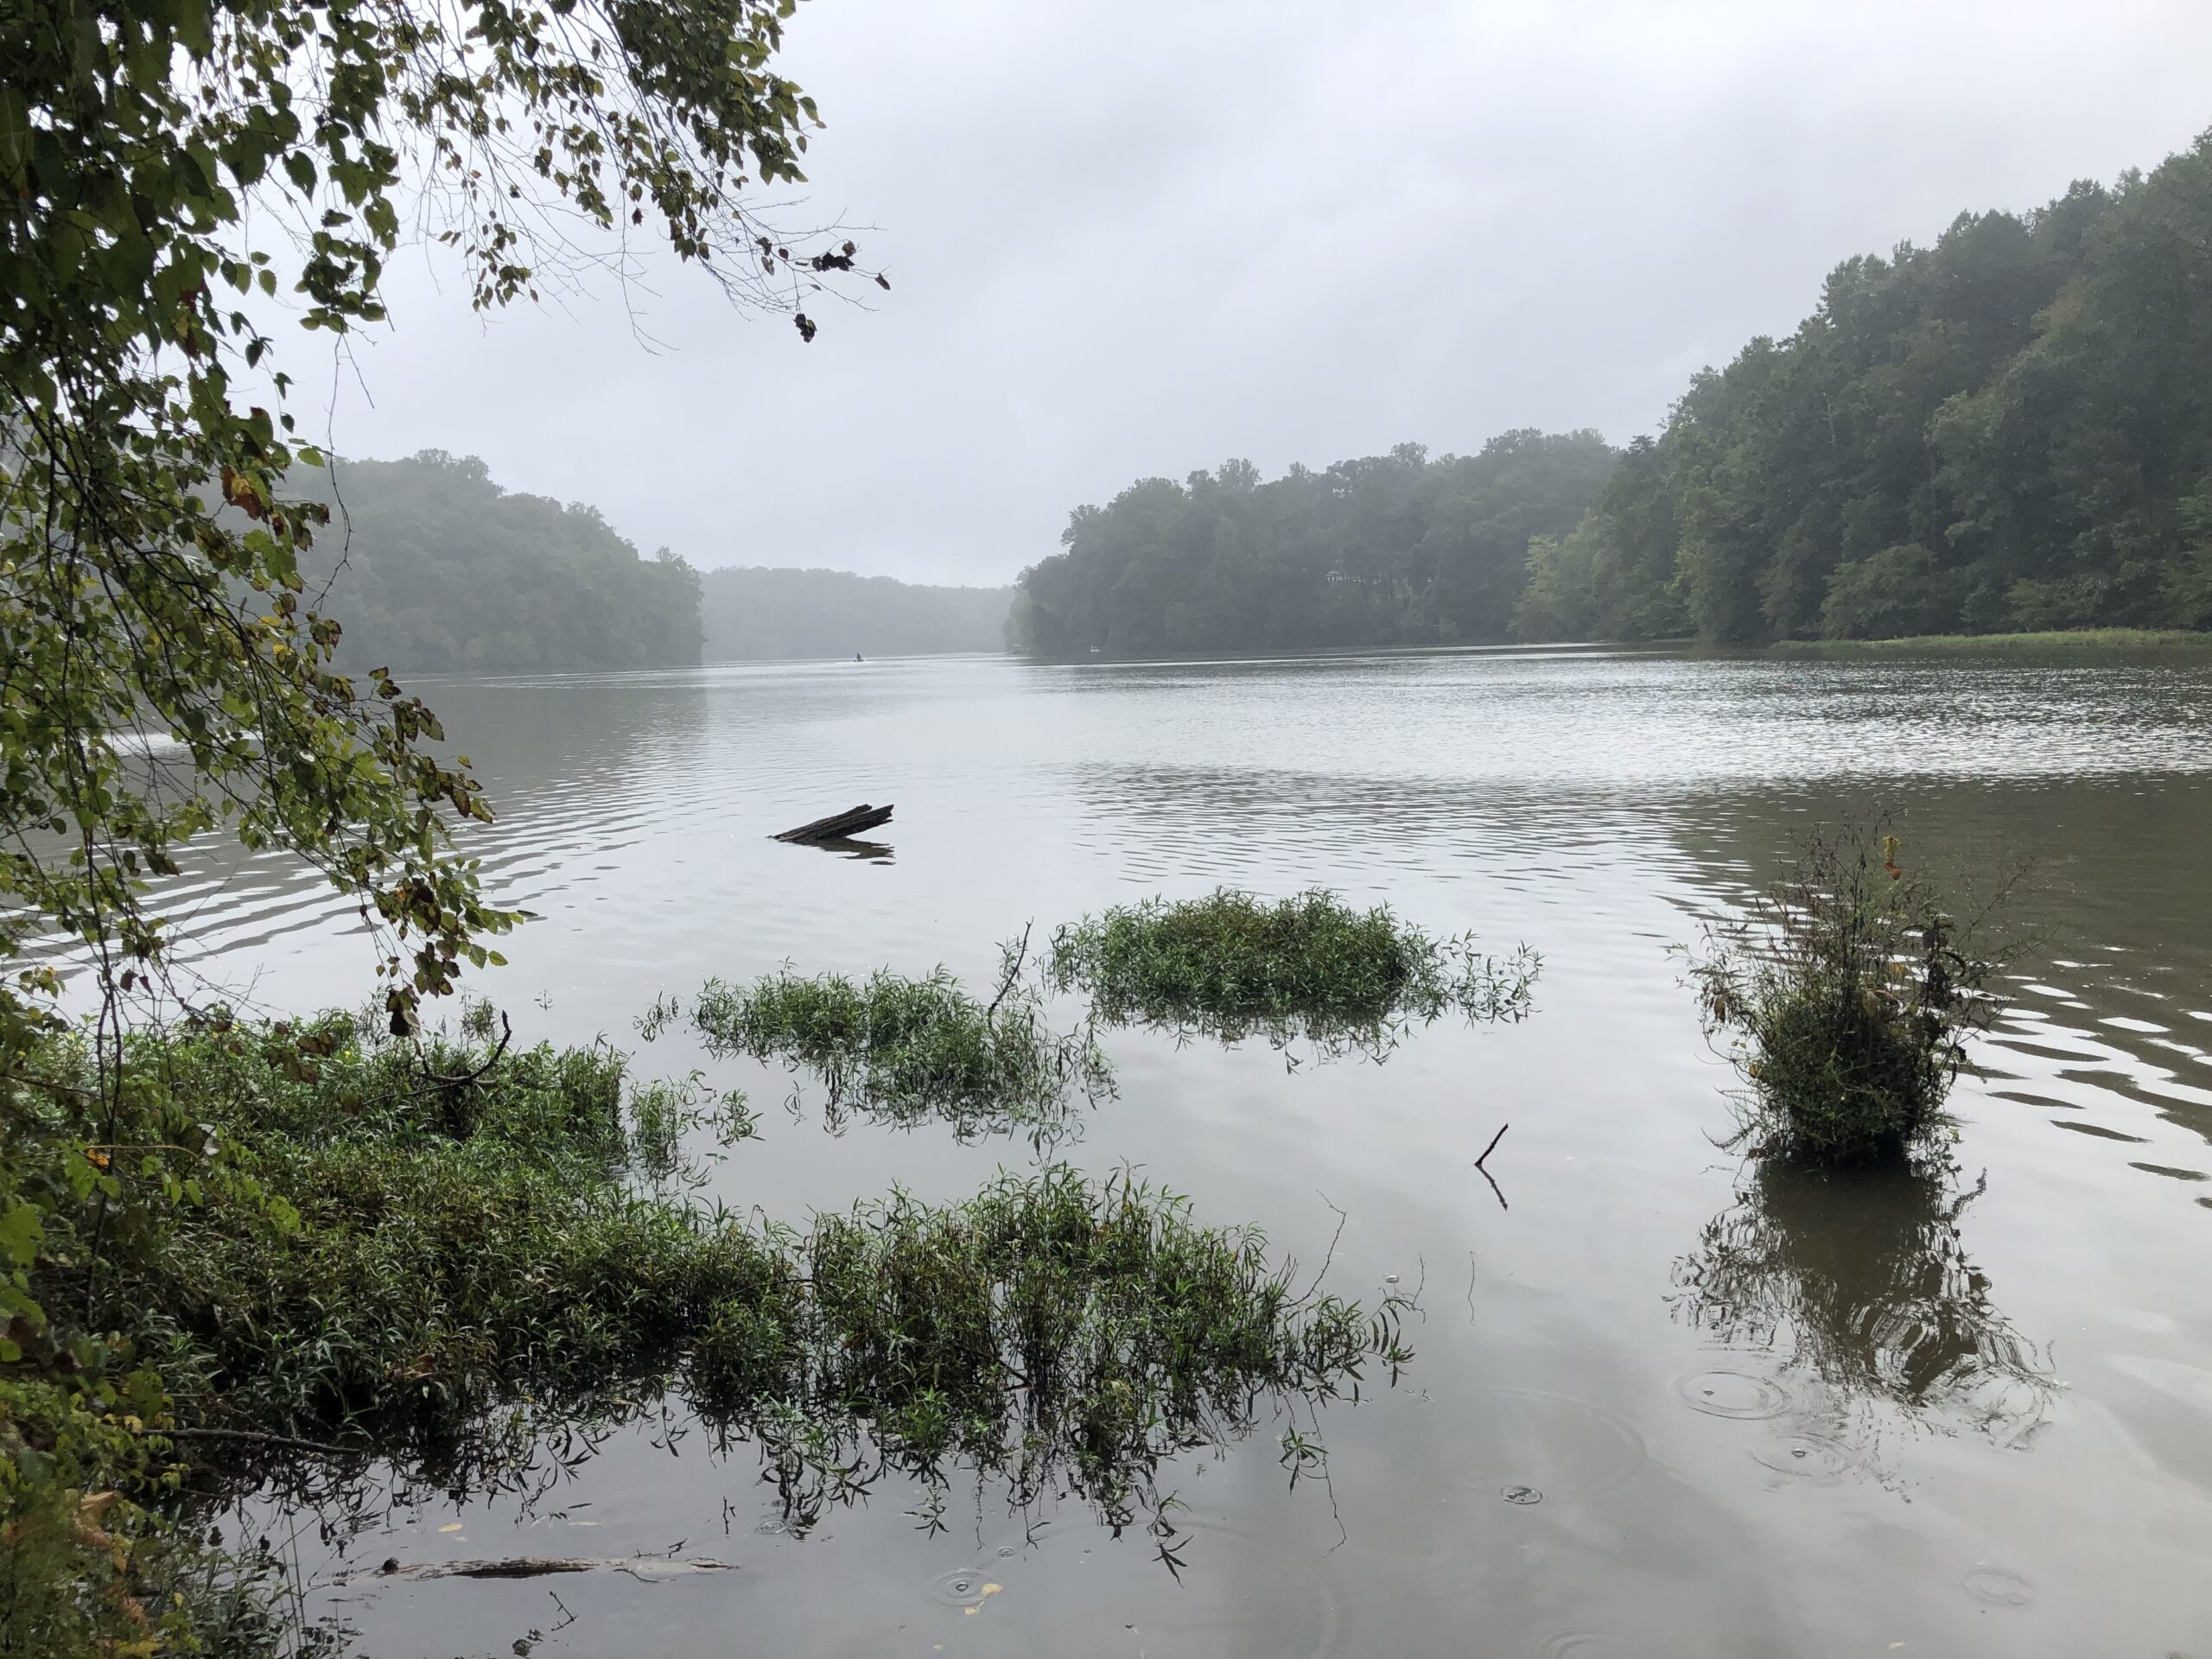 Bull Run flows into Occoquan Drinking water reservoir (Photo by Sujay Kaushal)